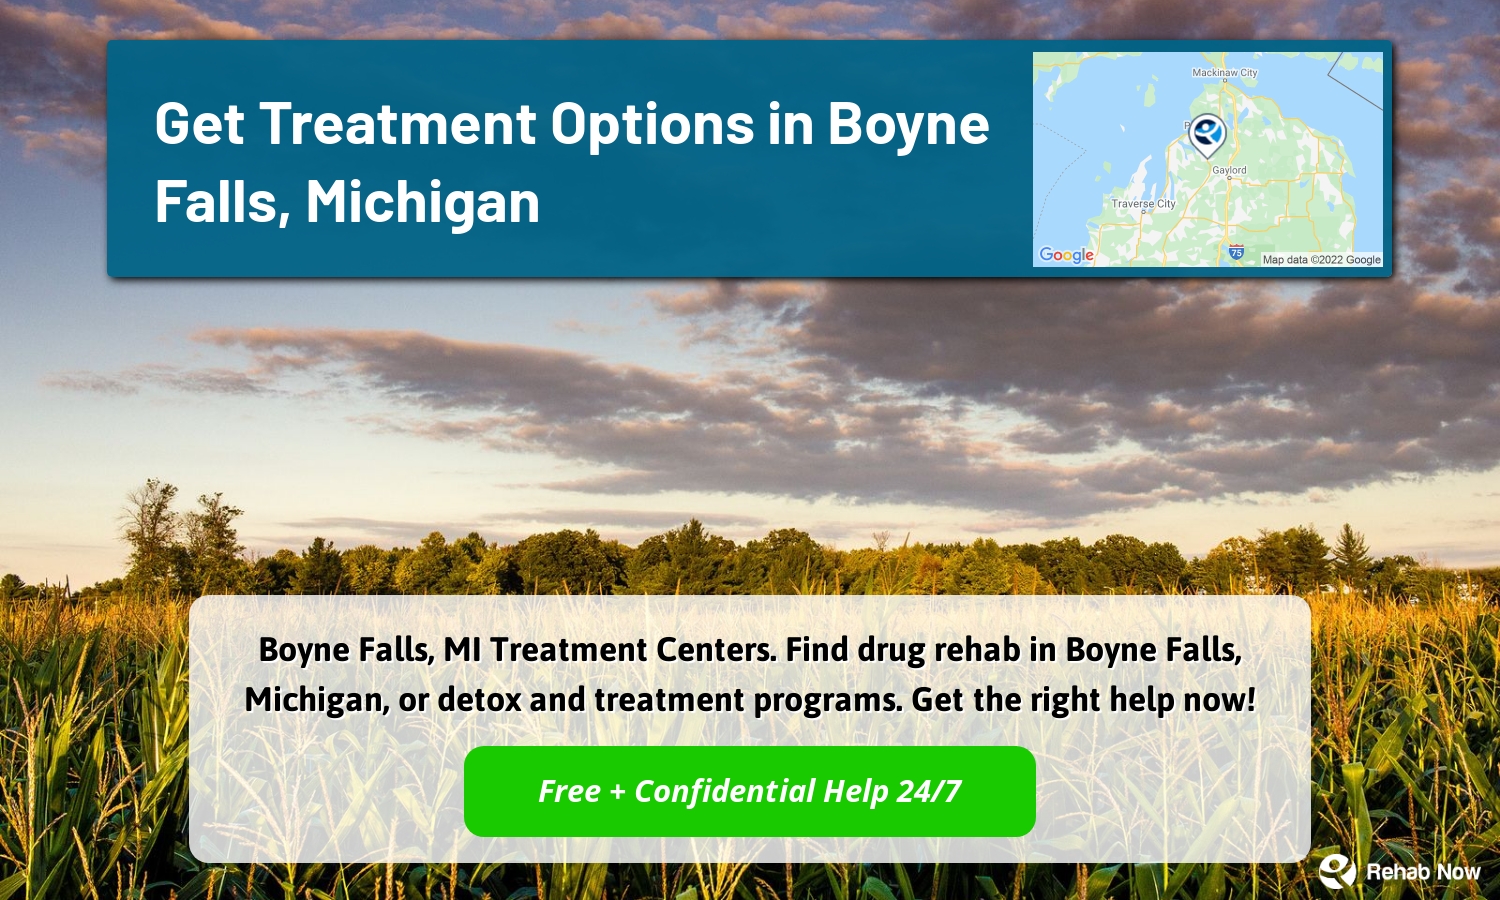 Boyne Falls, MI Treatment Centers. Find drug rehab in Boyne Falls, Michigan, or detox and treatment programs. Get the right help now!